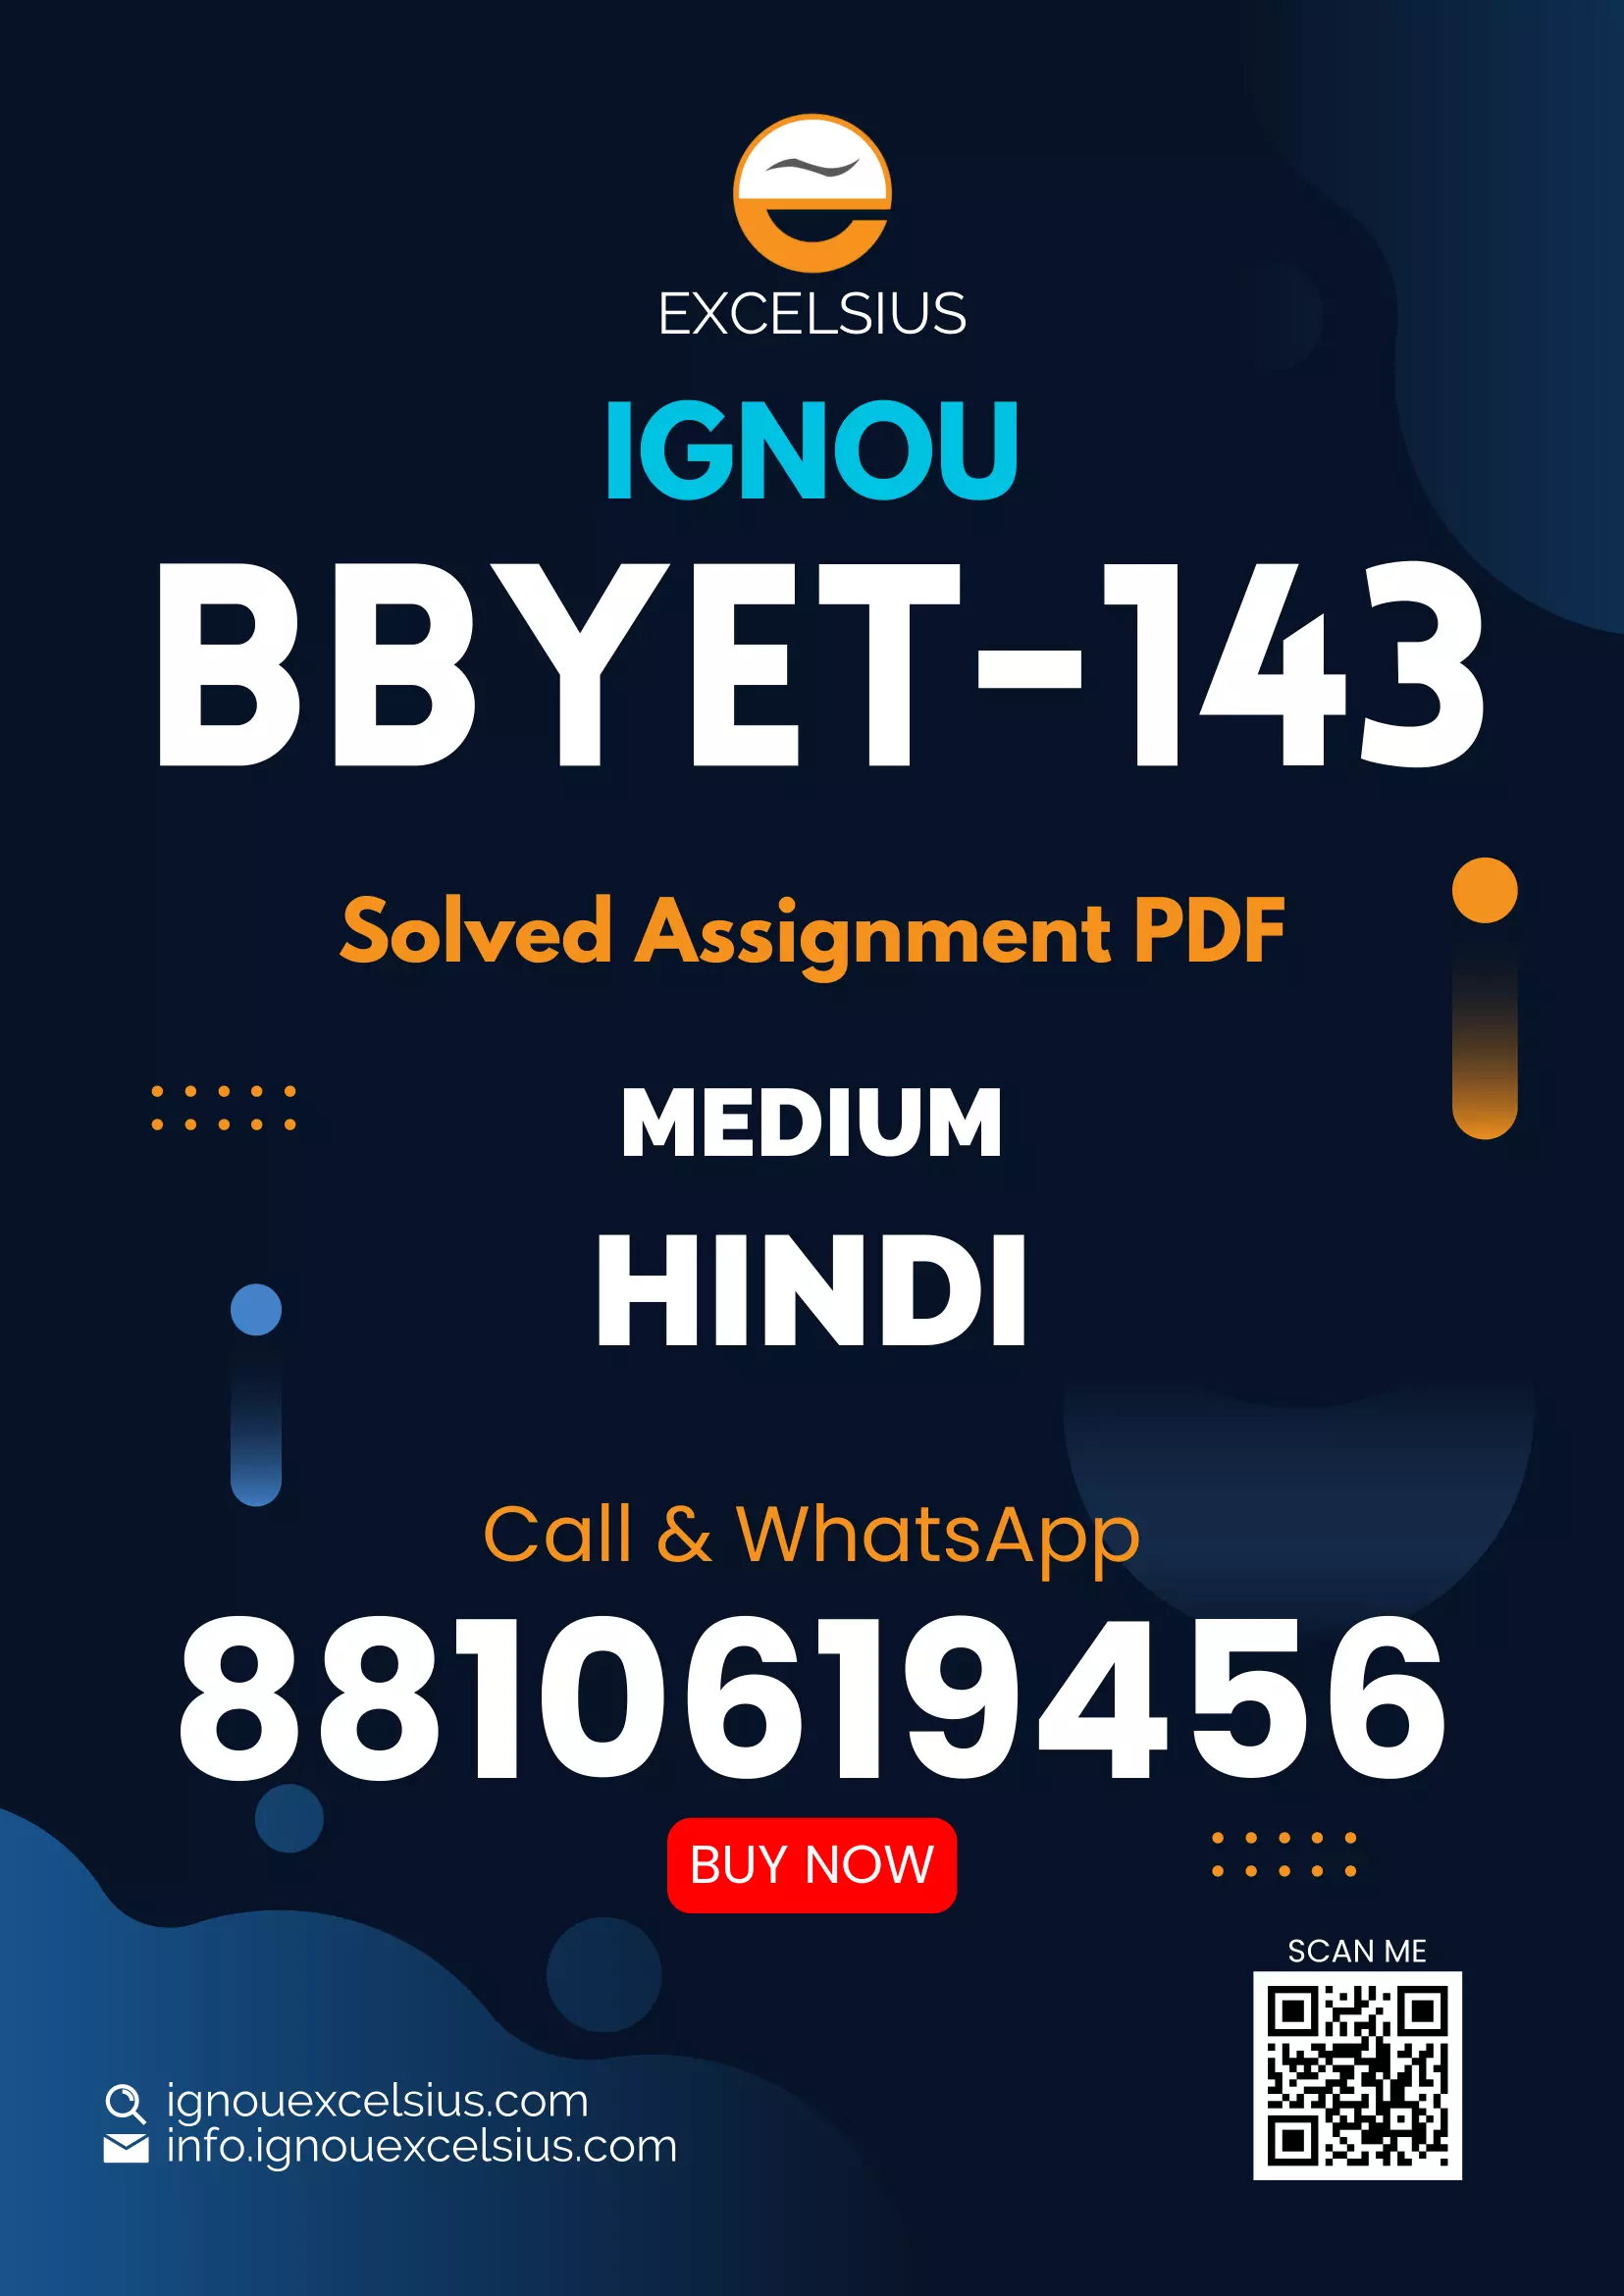 IGNOU BBYET-143 - Economic Botany and Plant Biotechnology, Latest Solved Assignment-January 2023 - December 2023